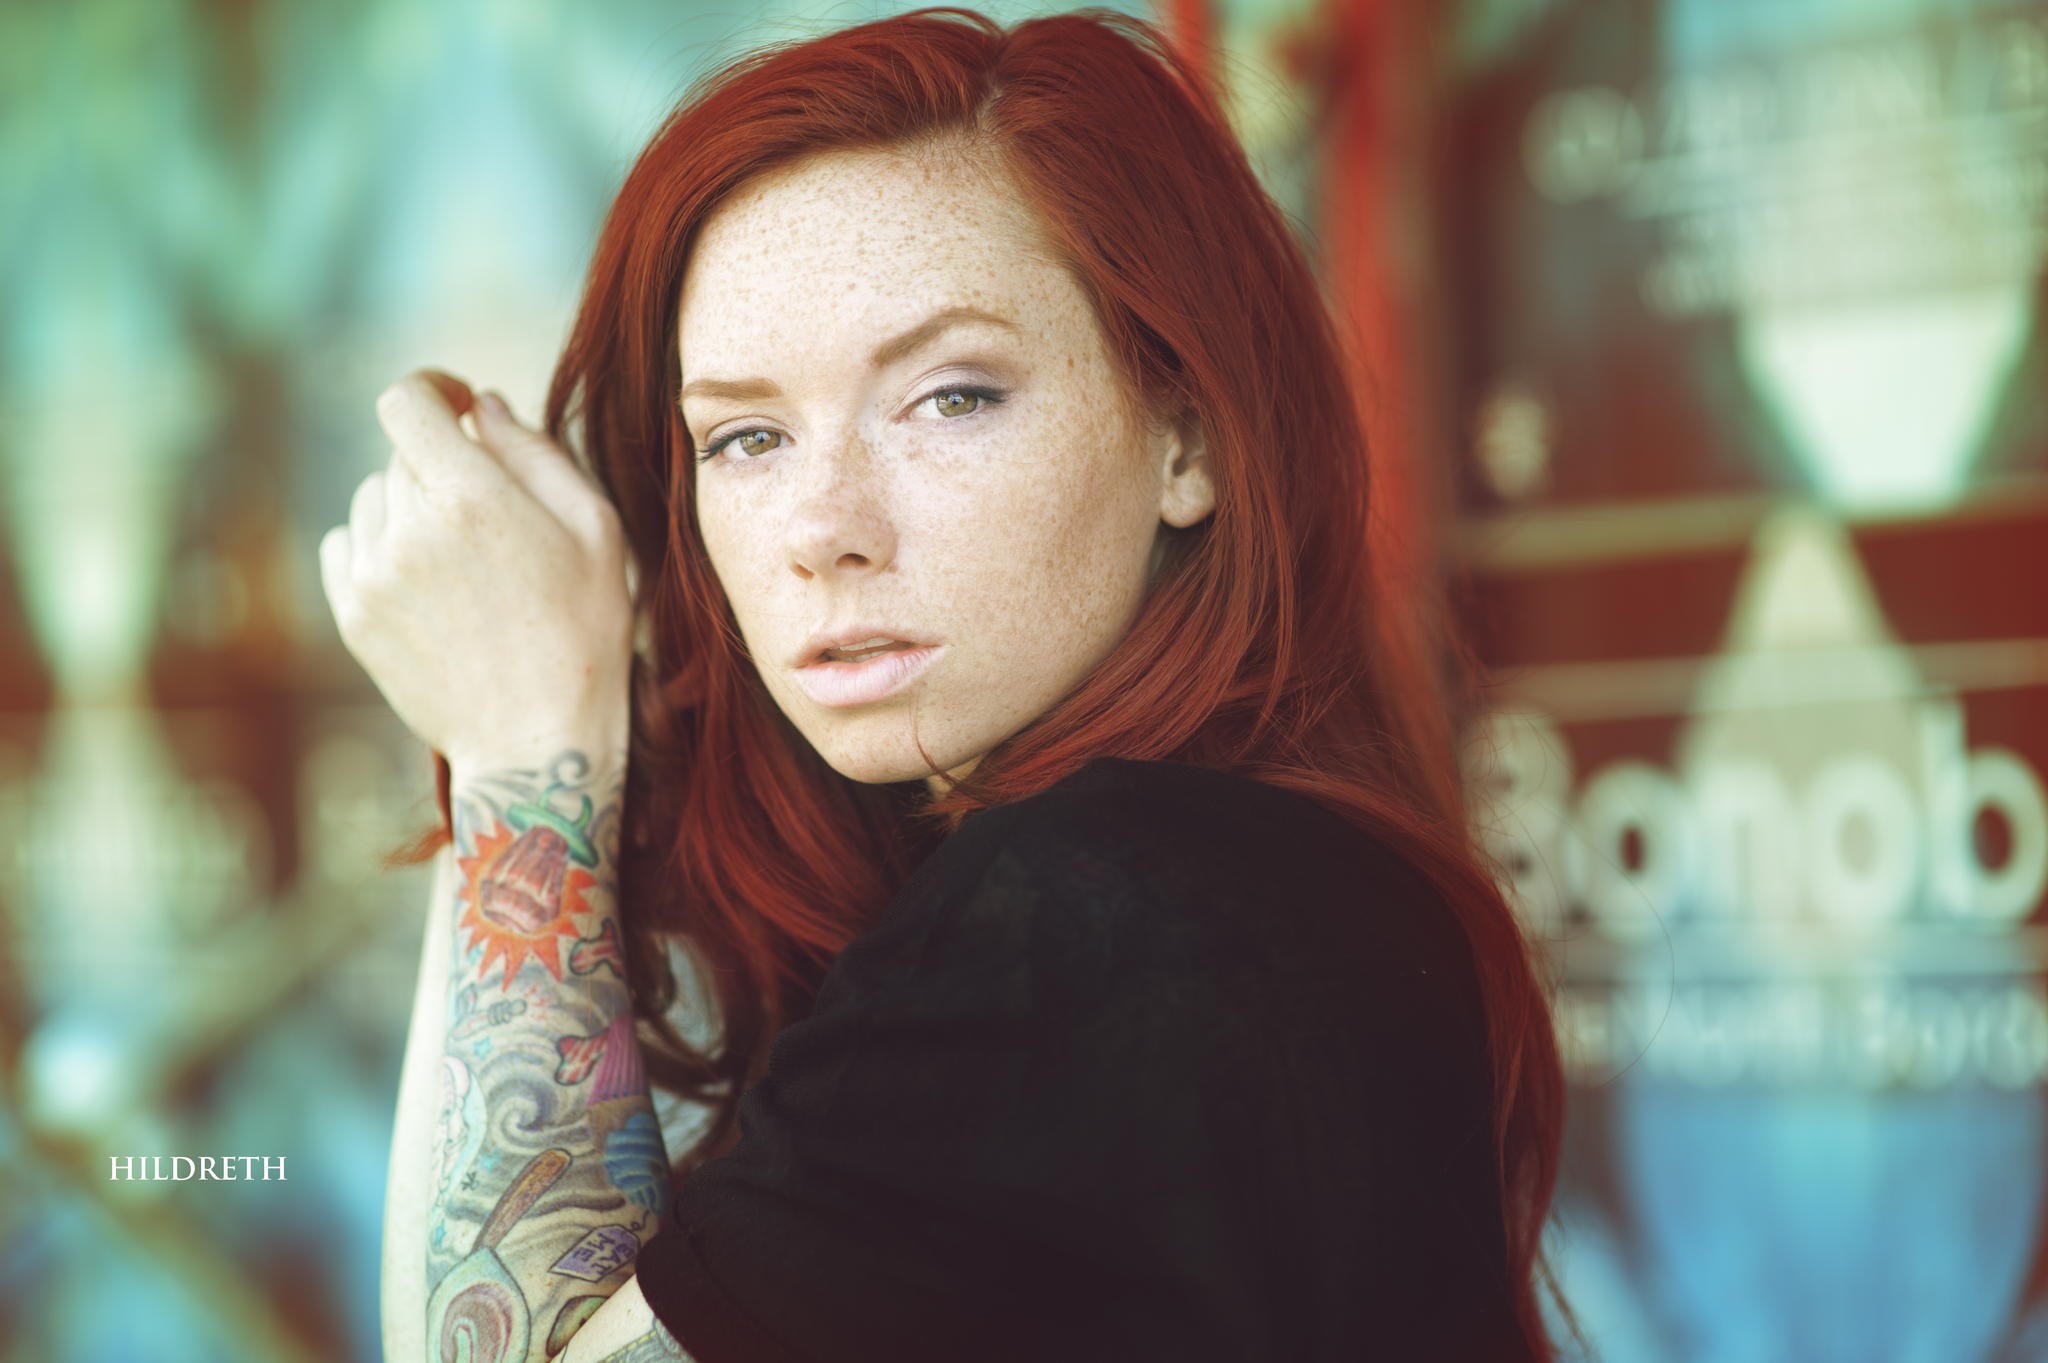 People 2048x1363 women freckles face Charles Hildreth Hattie Watson inked girls model looking at viewer redhead watermarked closeup